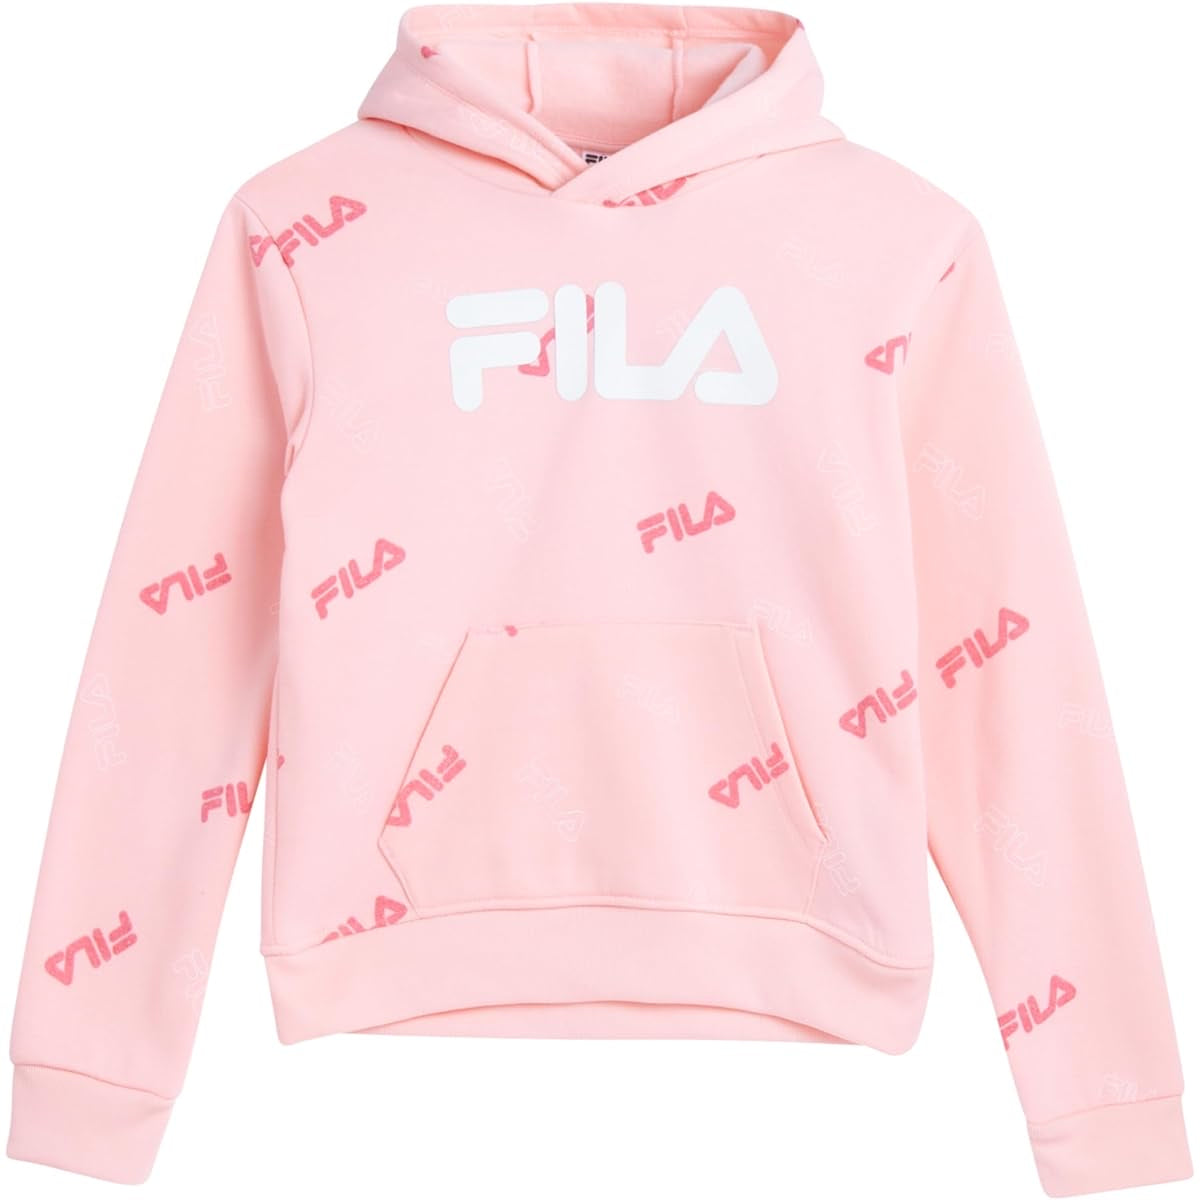 Fila outfit